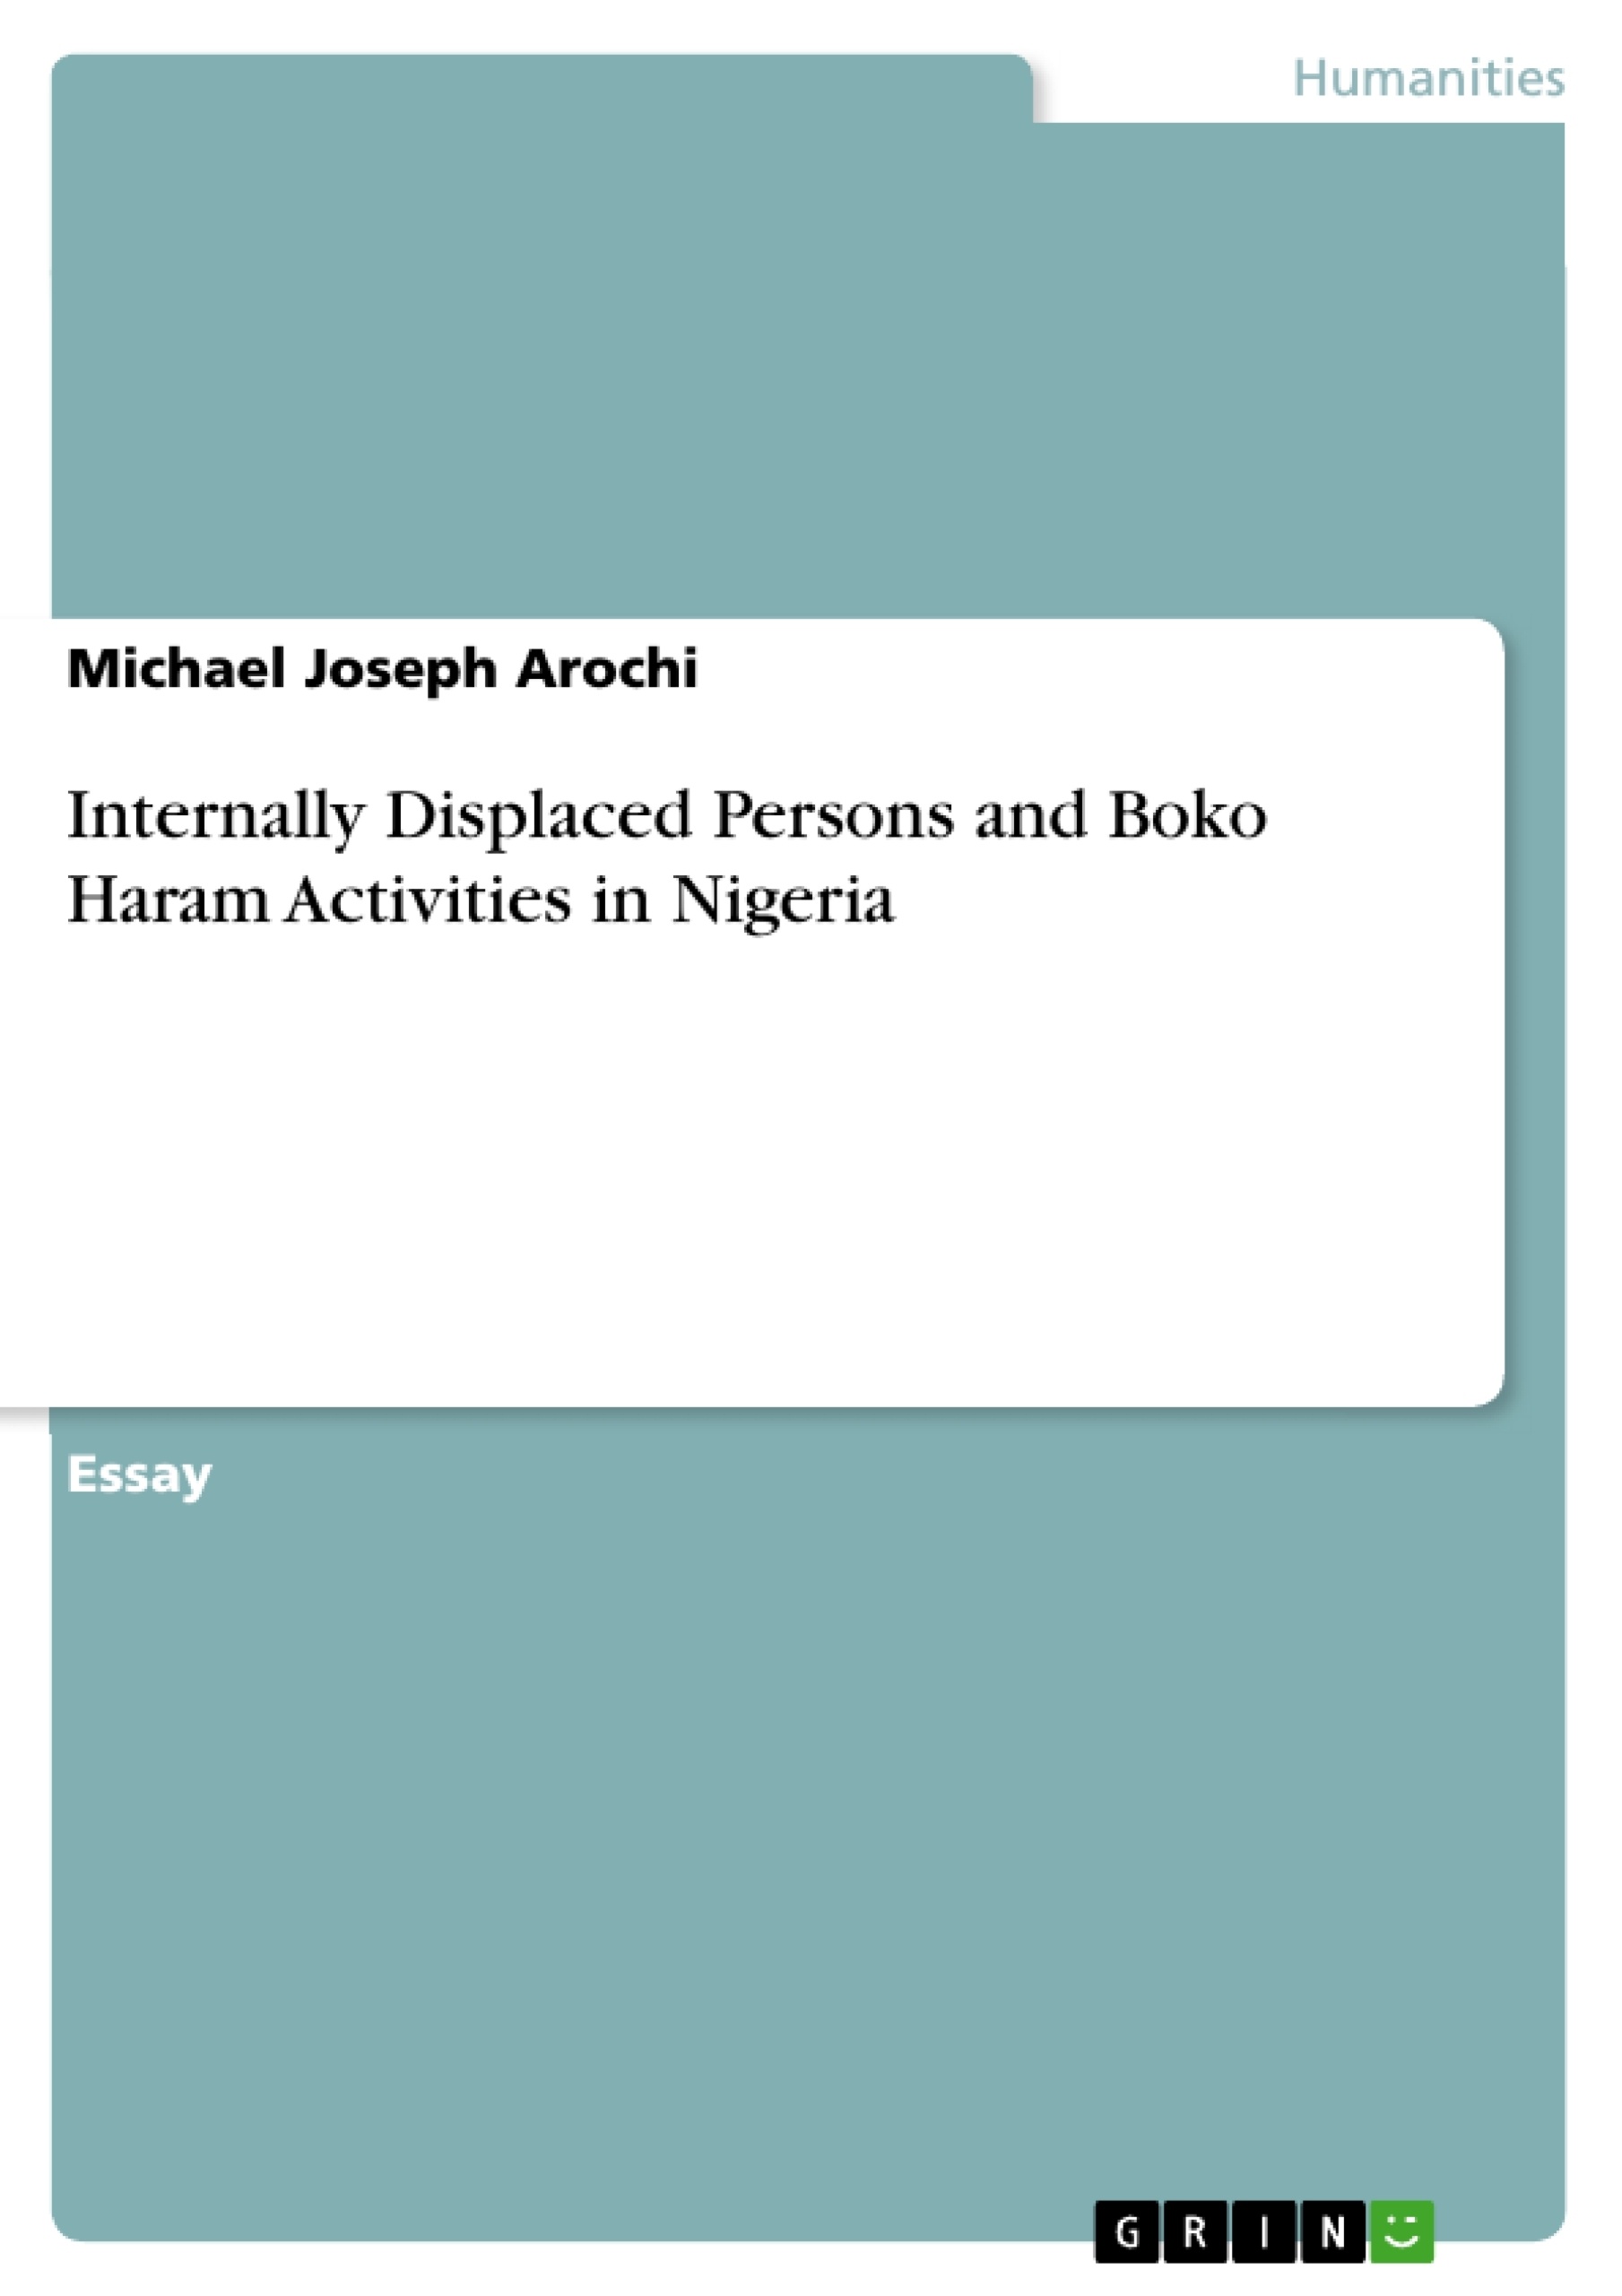 Title: Internally Displaced Persons and Boko Haram Activities in Nigeria